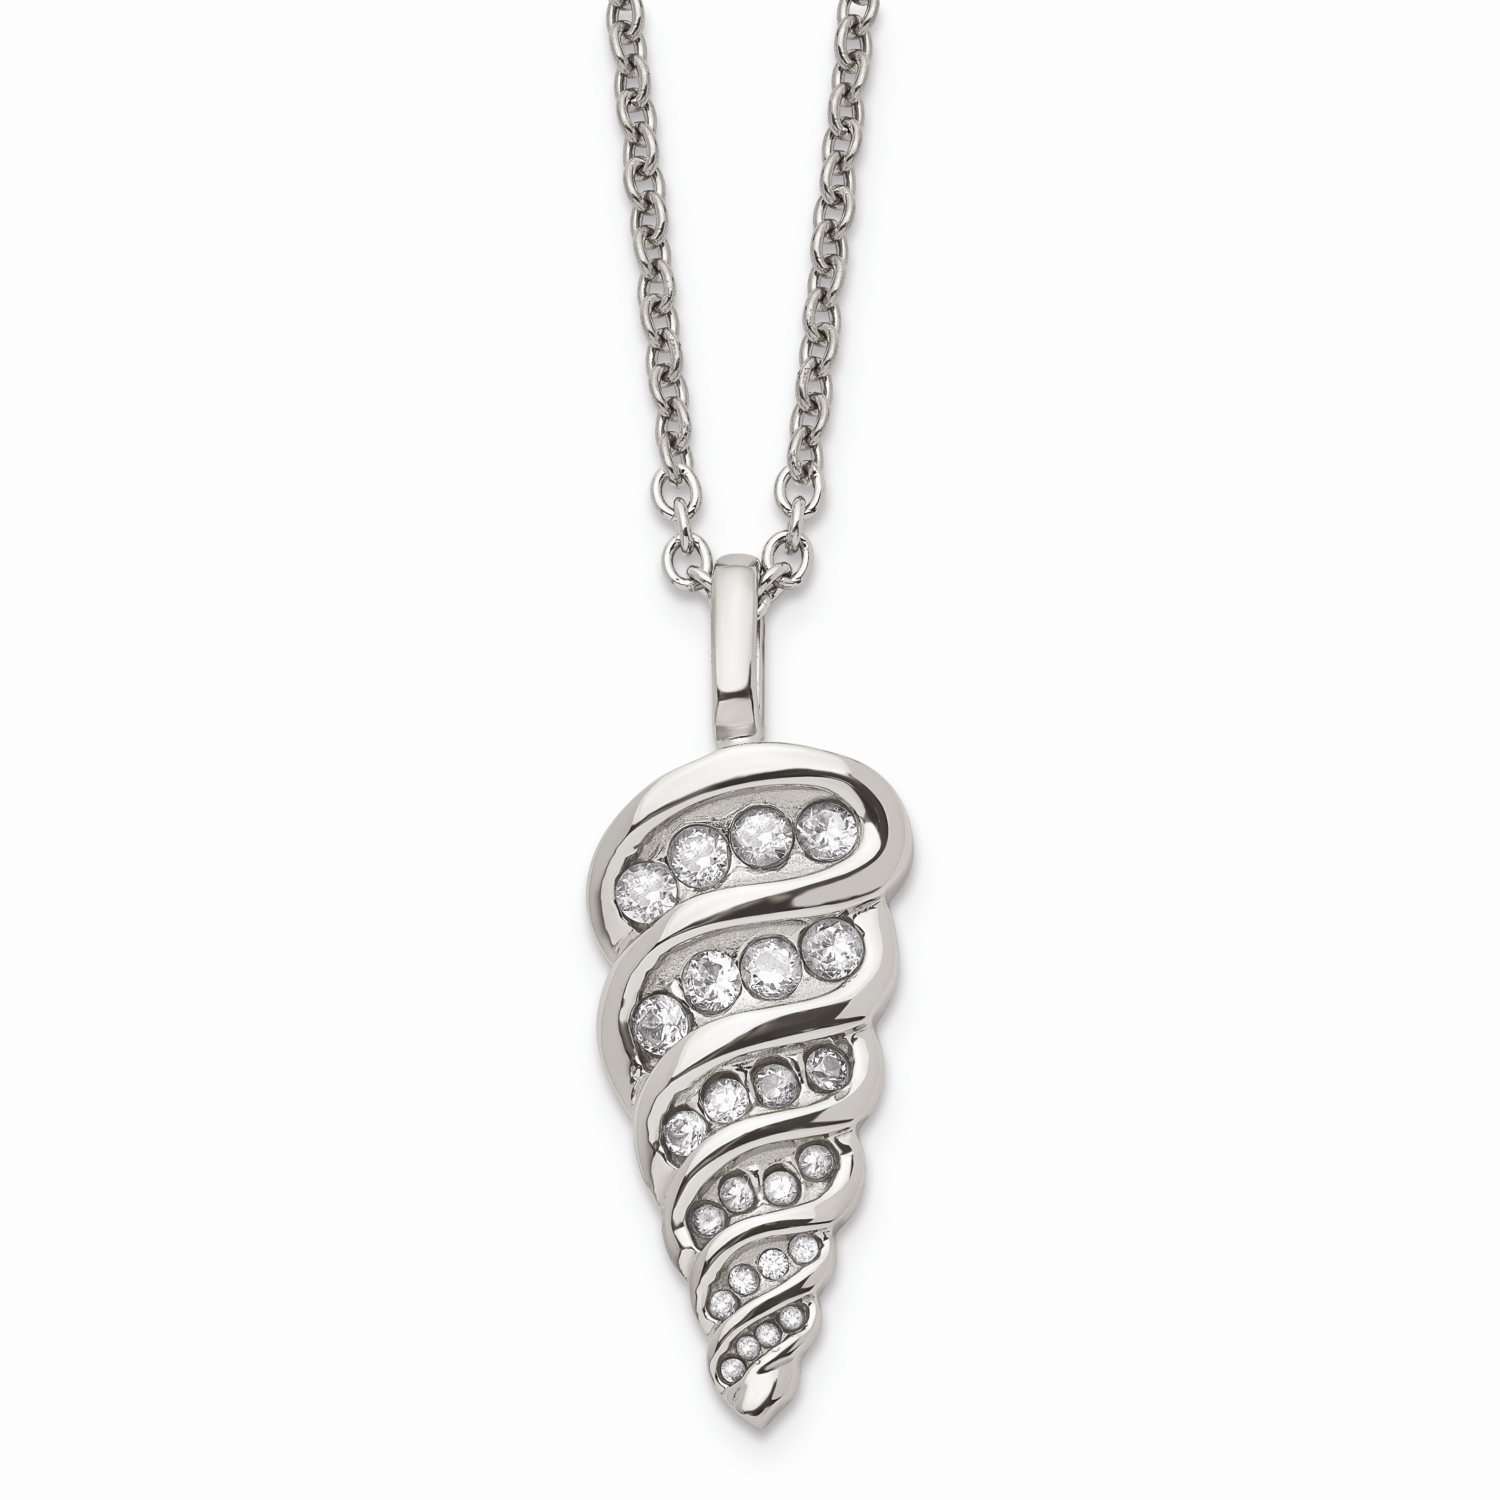 Fancy Shell CZ Stone Pendant 22 Inch Necklace Stainless Steel SRN592-22